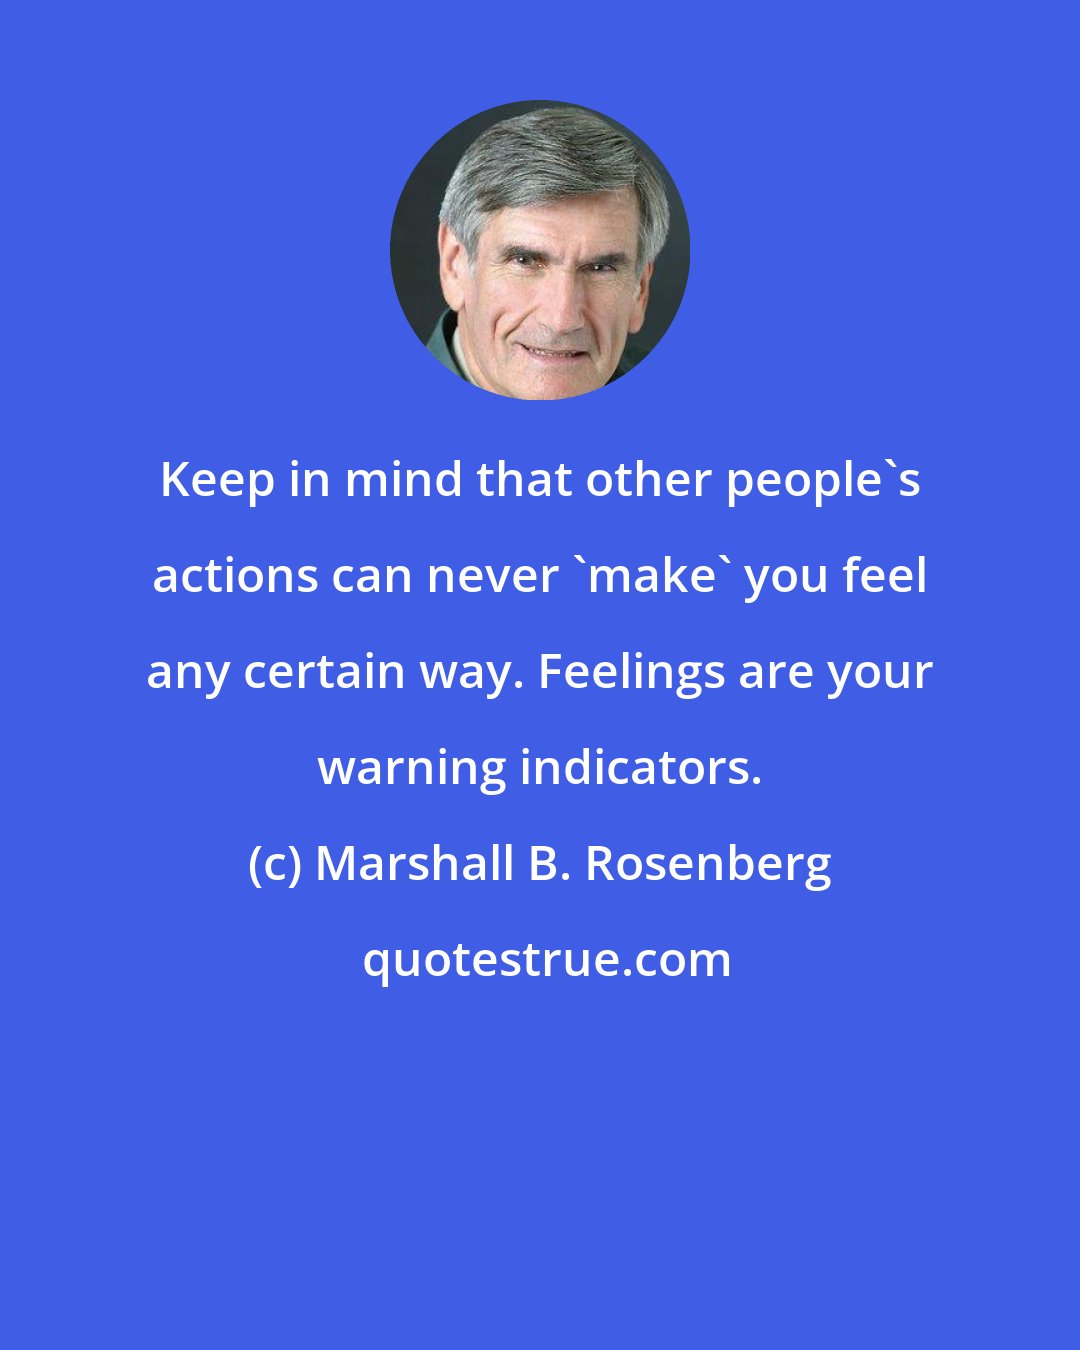 Marshall B. Rosenberg: Keep in mind that other people's actions can never 'make' you feel any certain way. Feelings are your warning indicators.